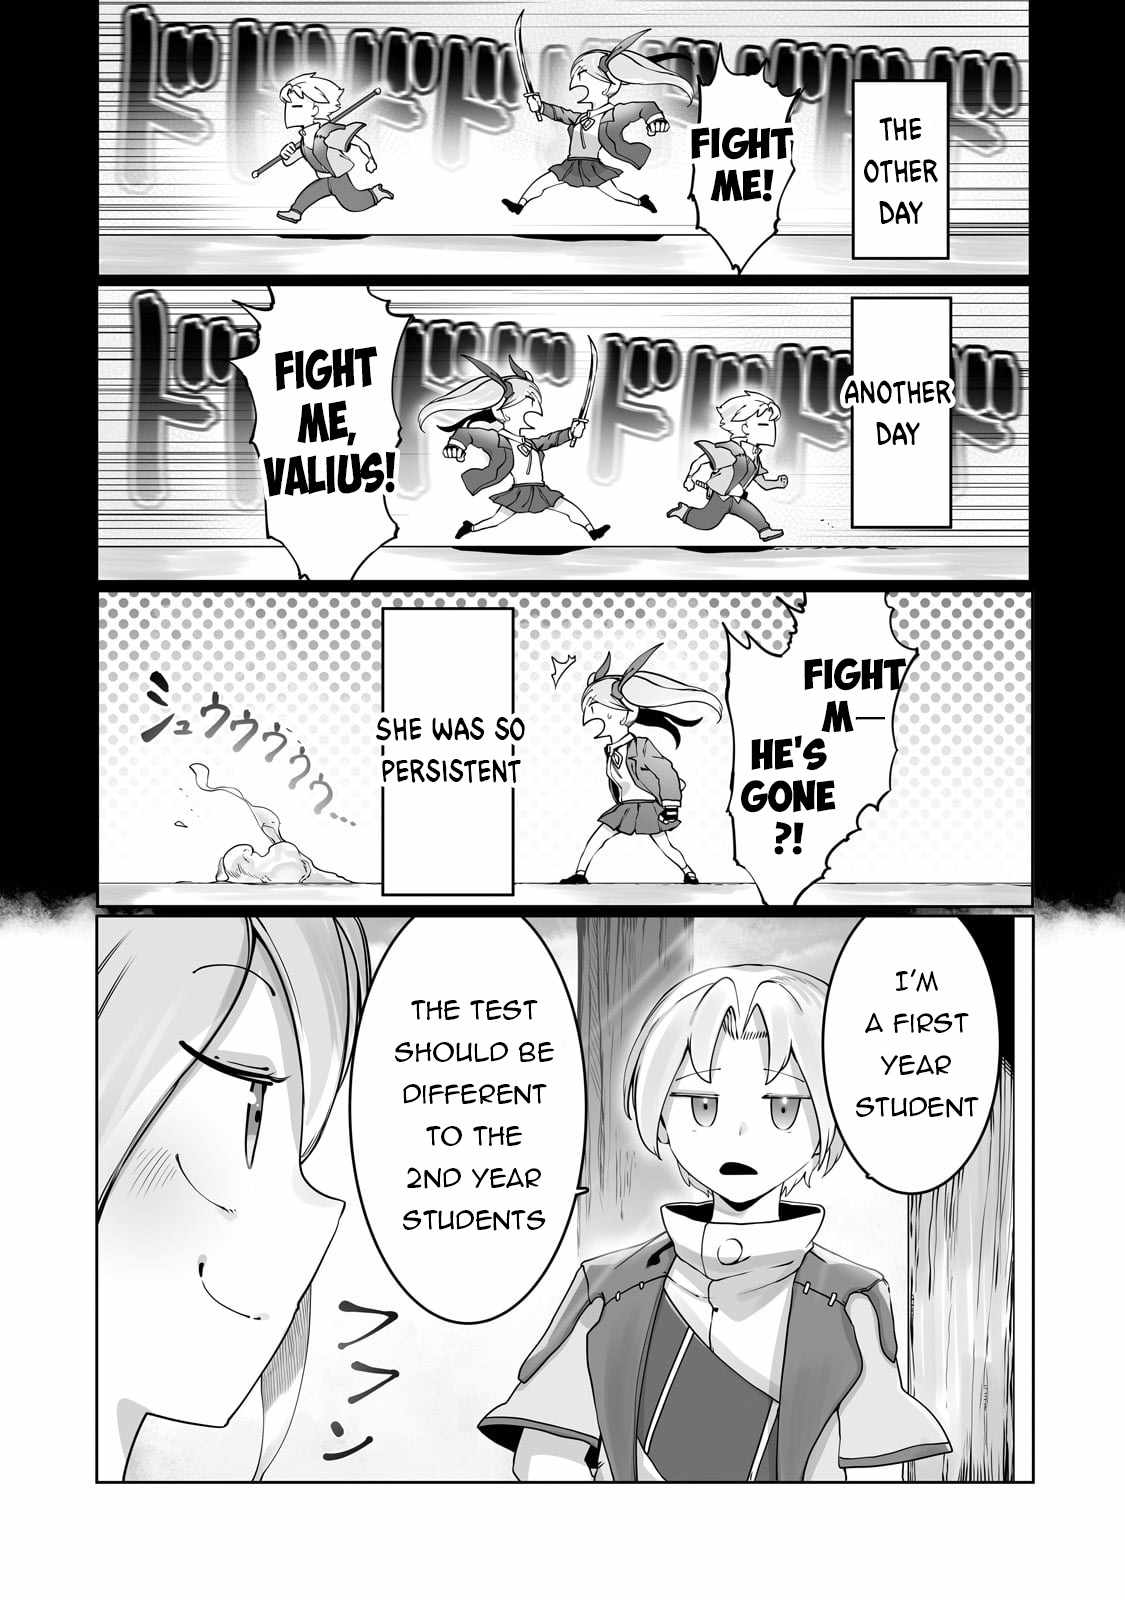 The Useless Tamer Will Turn Into The Top Unconsciously By My Previous Life Knowledge - Page 4